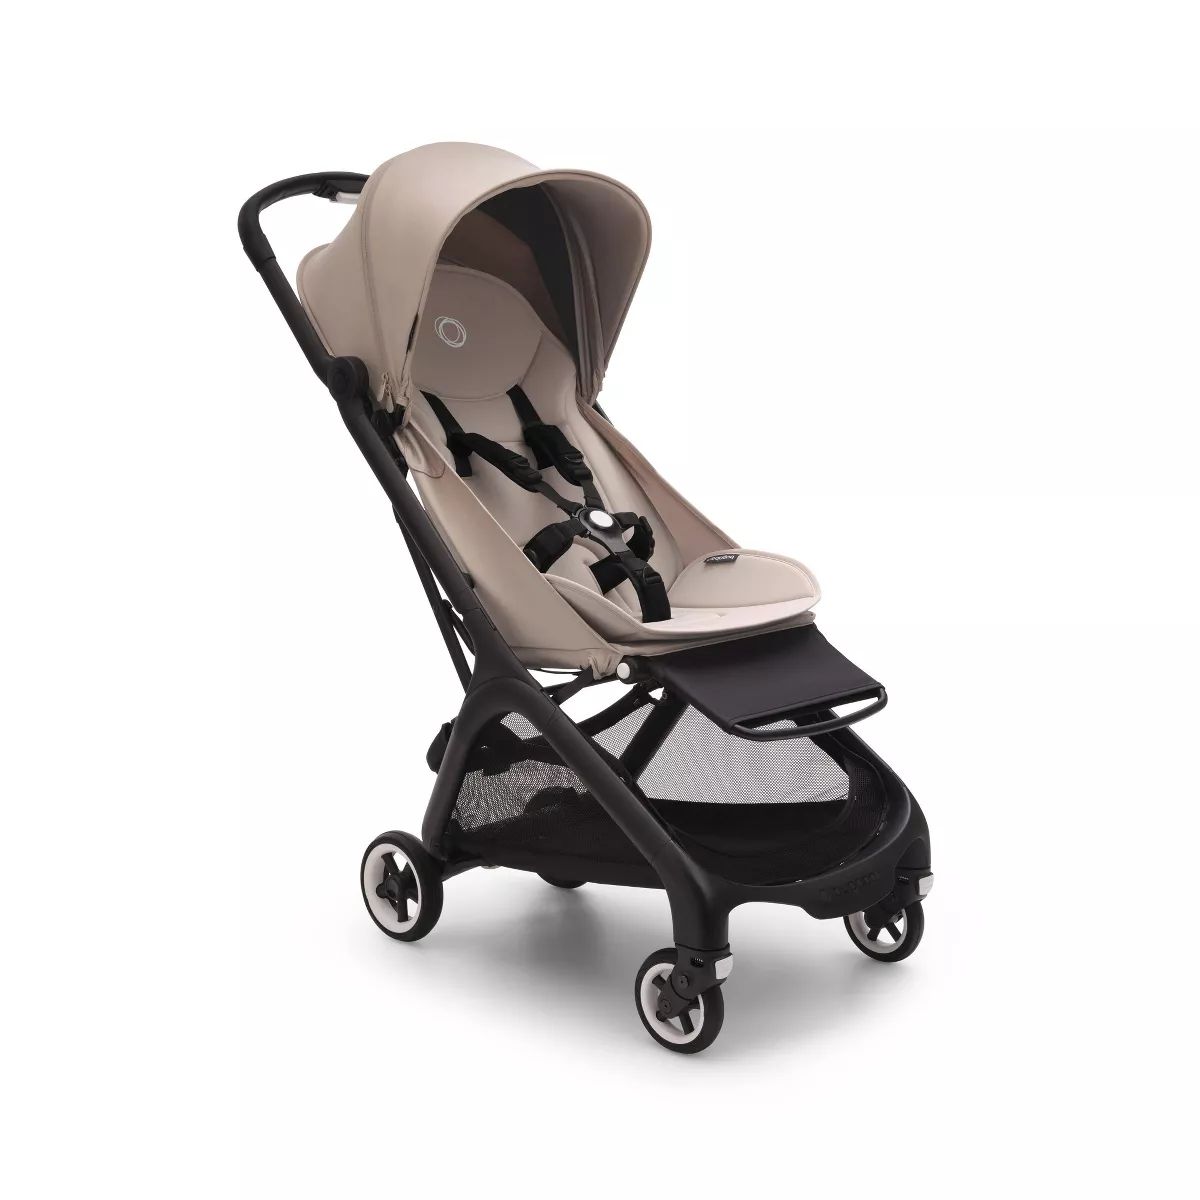 Bugaboo Butterfly 1 Second Fold Ultra Compact Stroller | Target